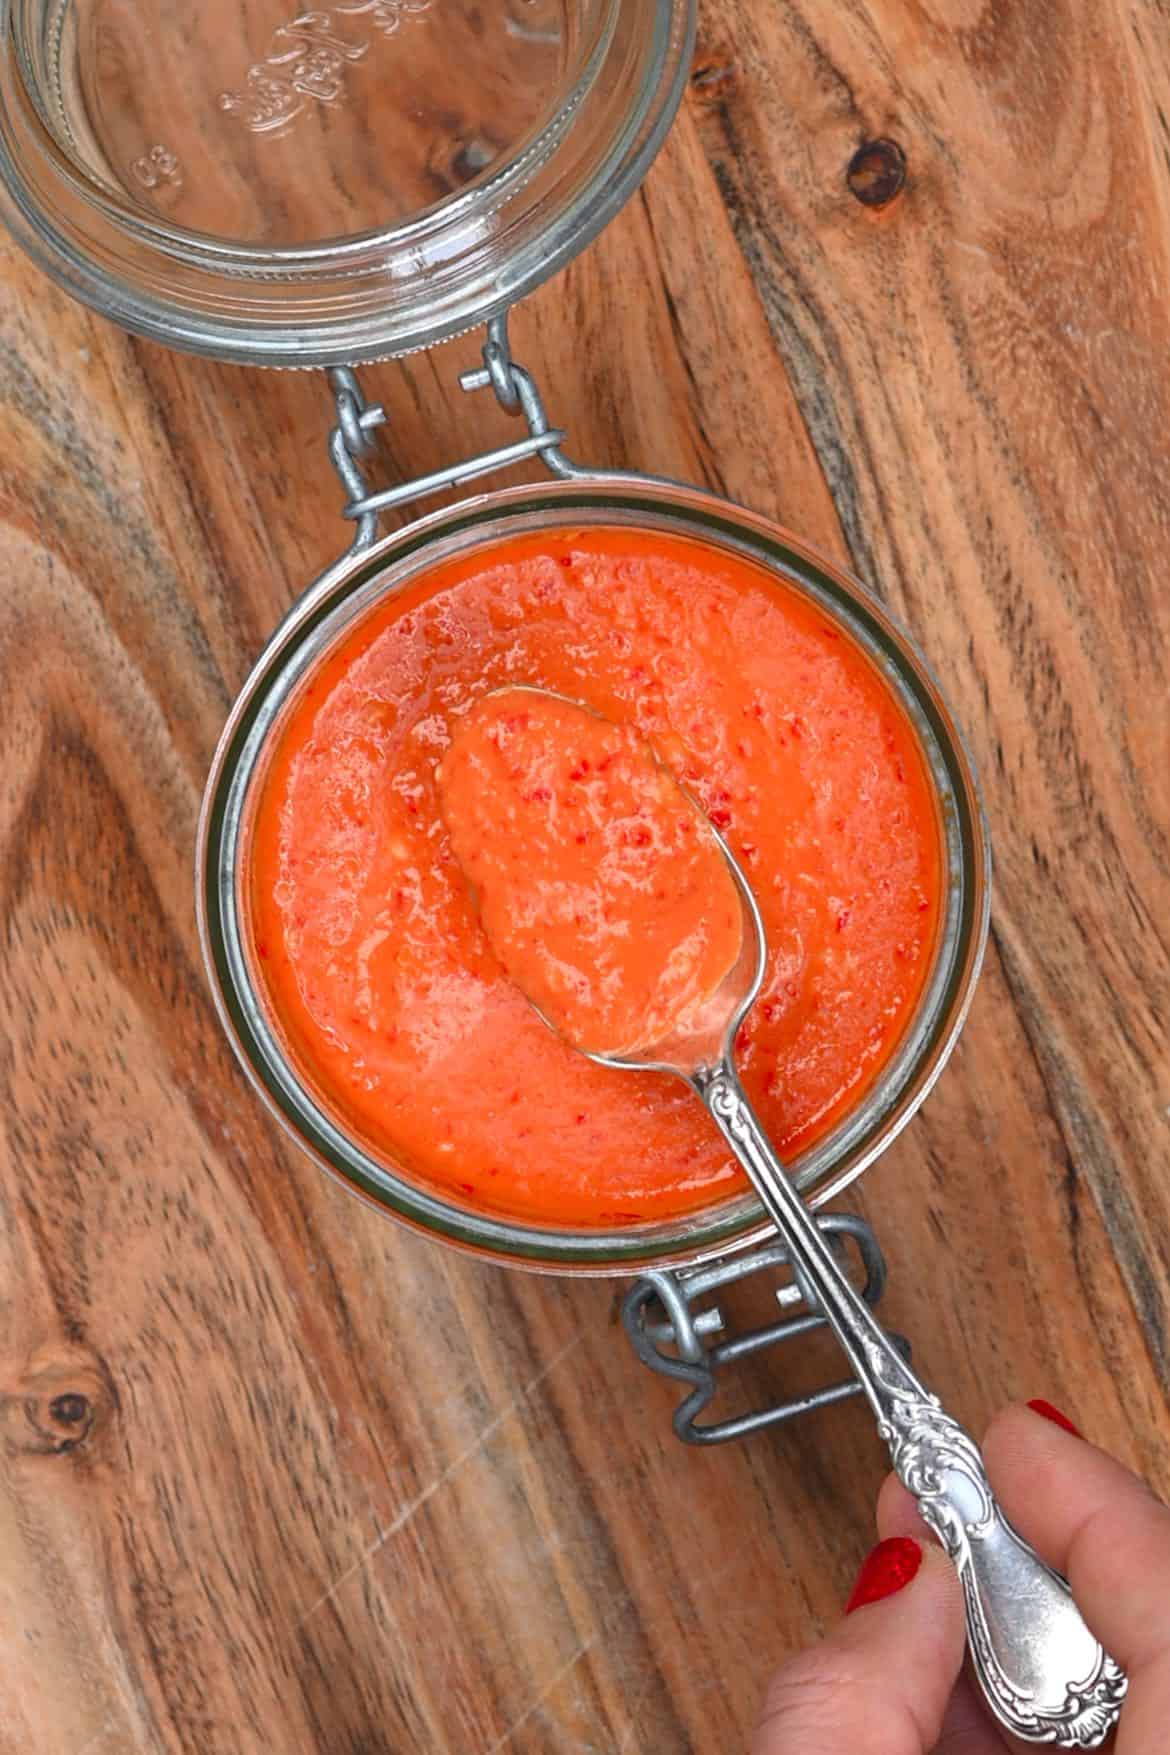 Red chili sauce being spooned out of a jar